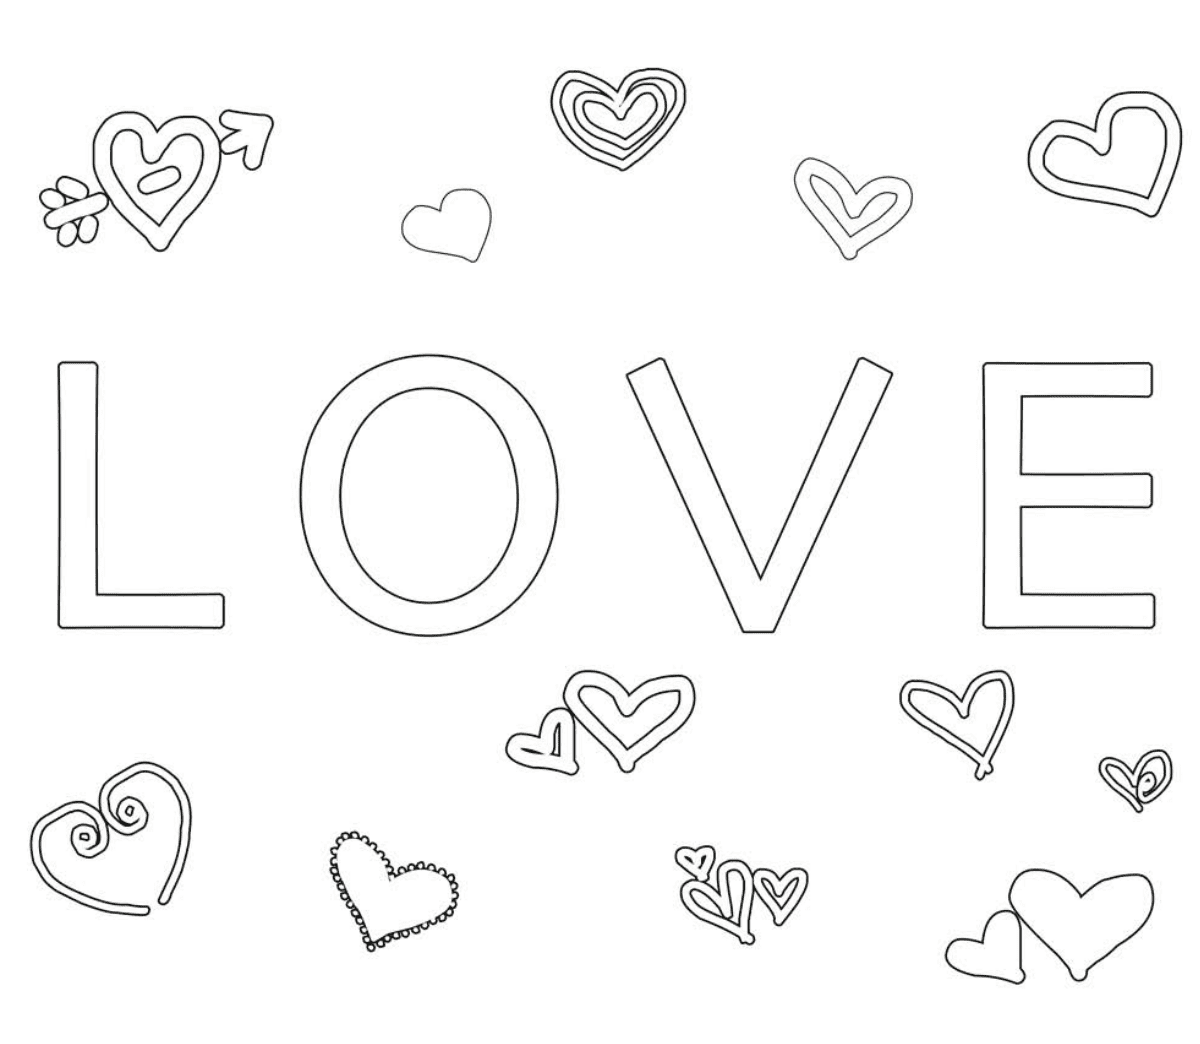 20 Free Printable Valentine's Day Coloring Pages for Kids   Parents